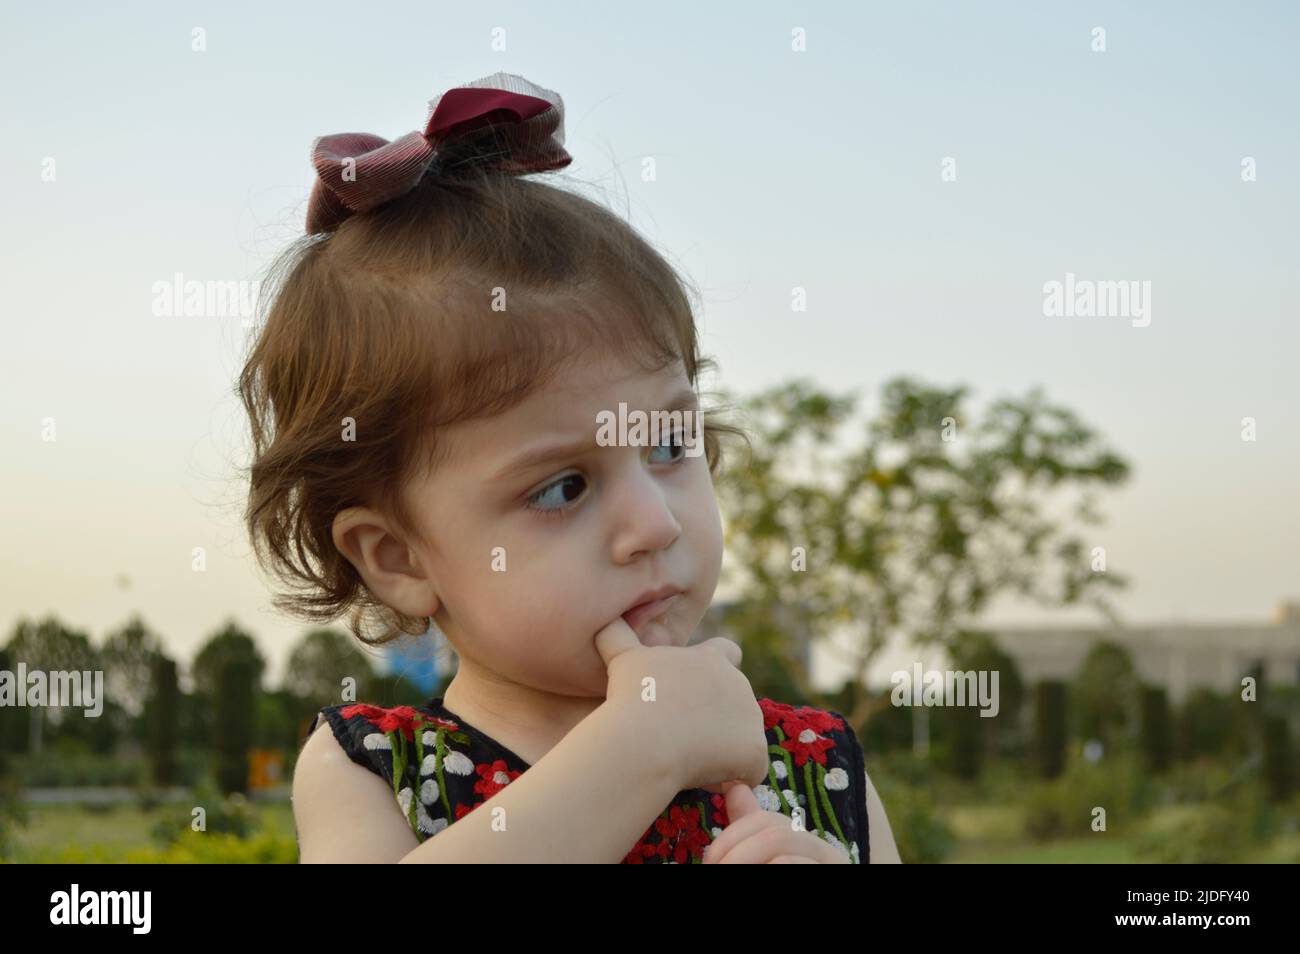 Cute South Asian Baby Girl in a Good Mood Stock Photo